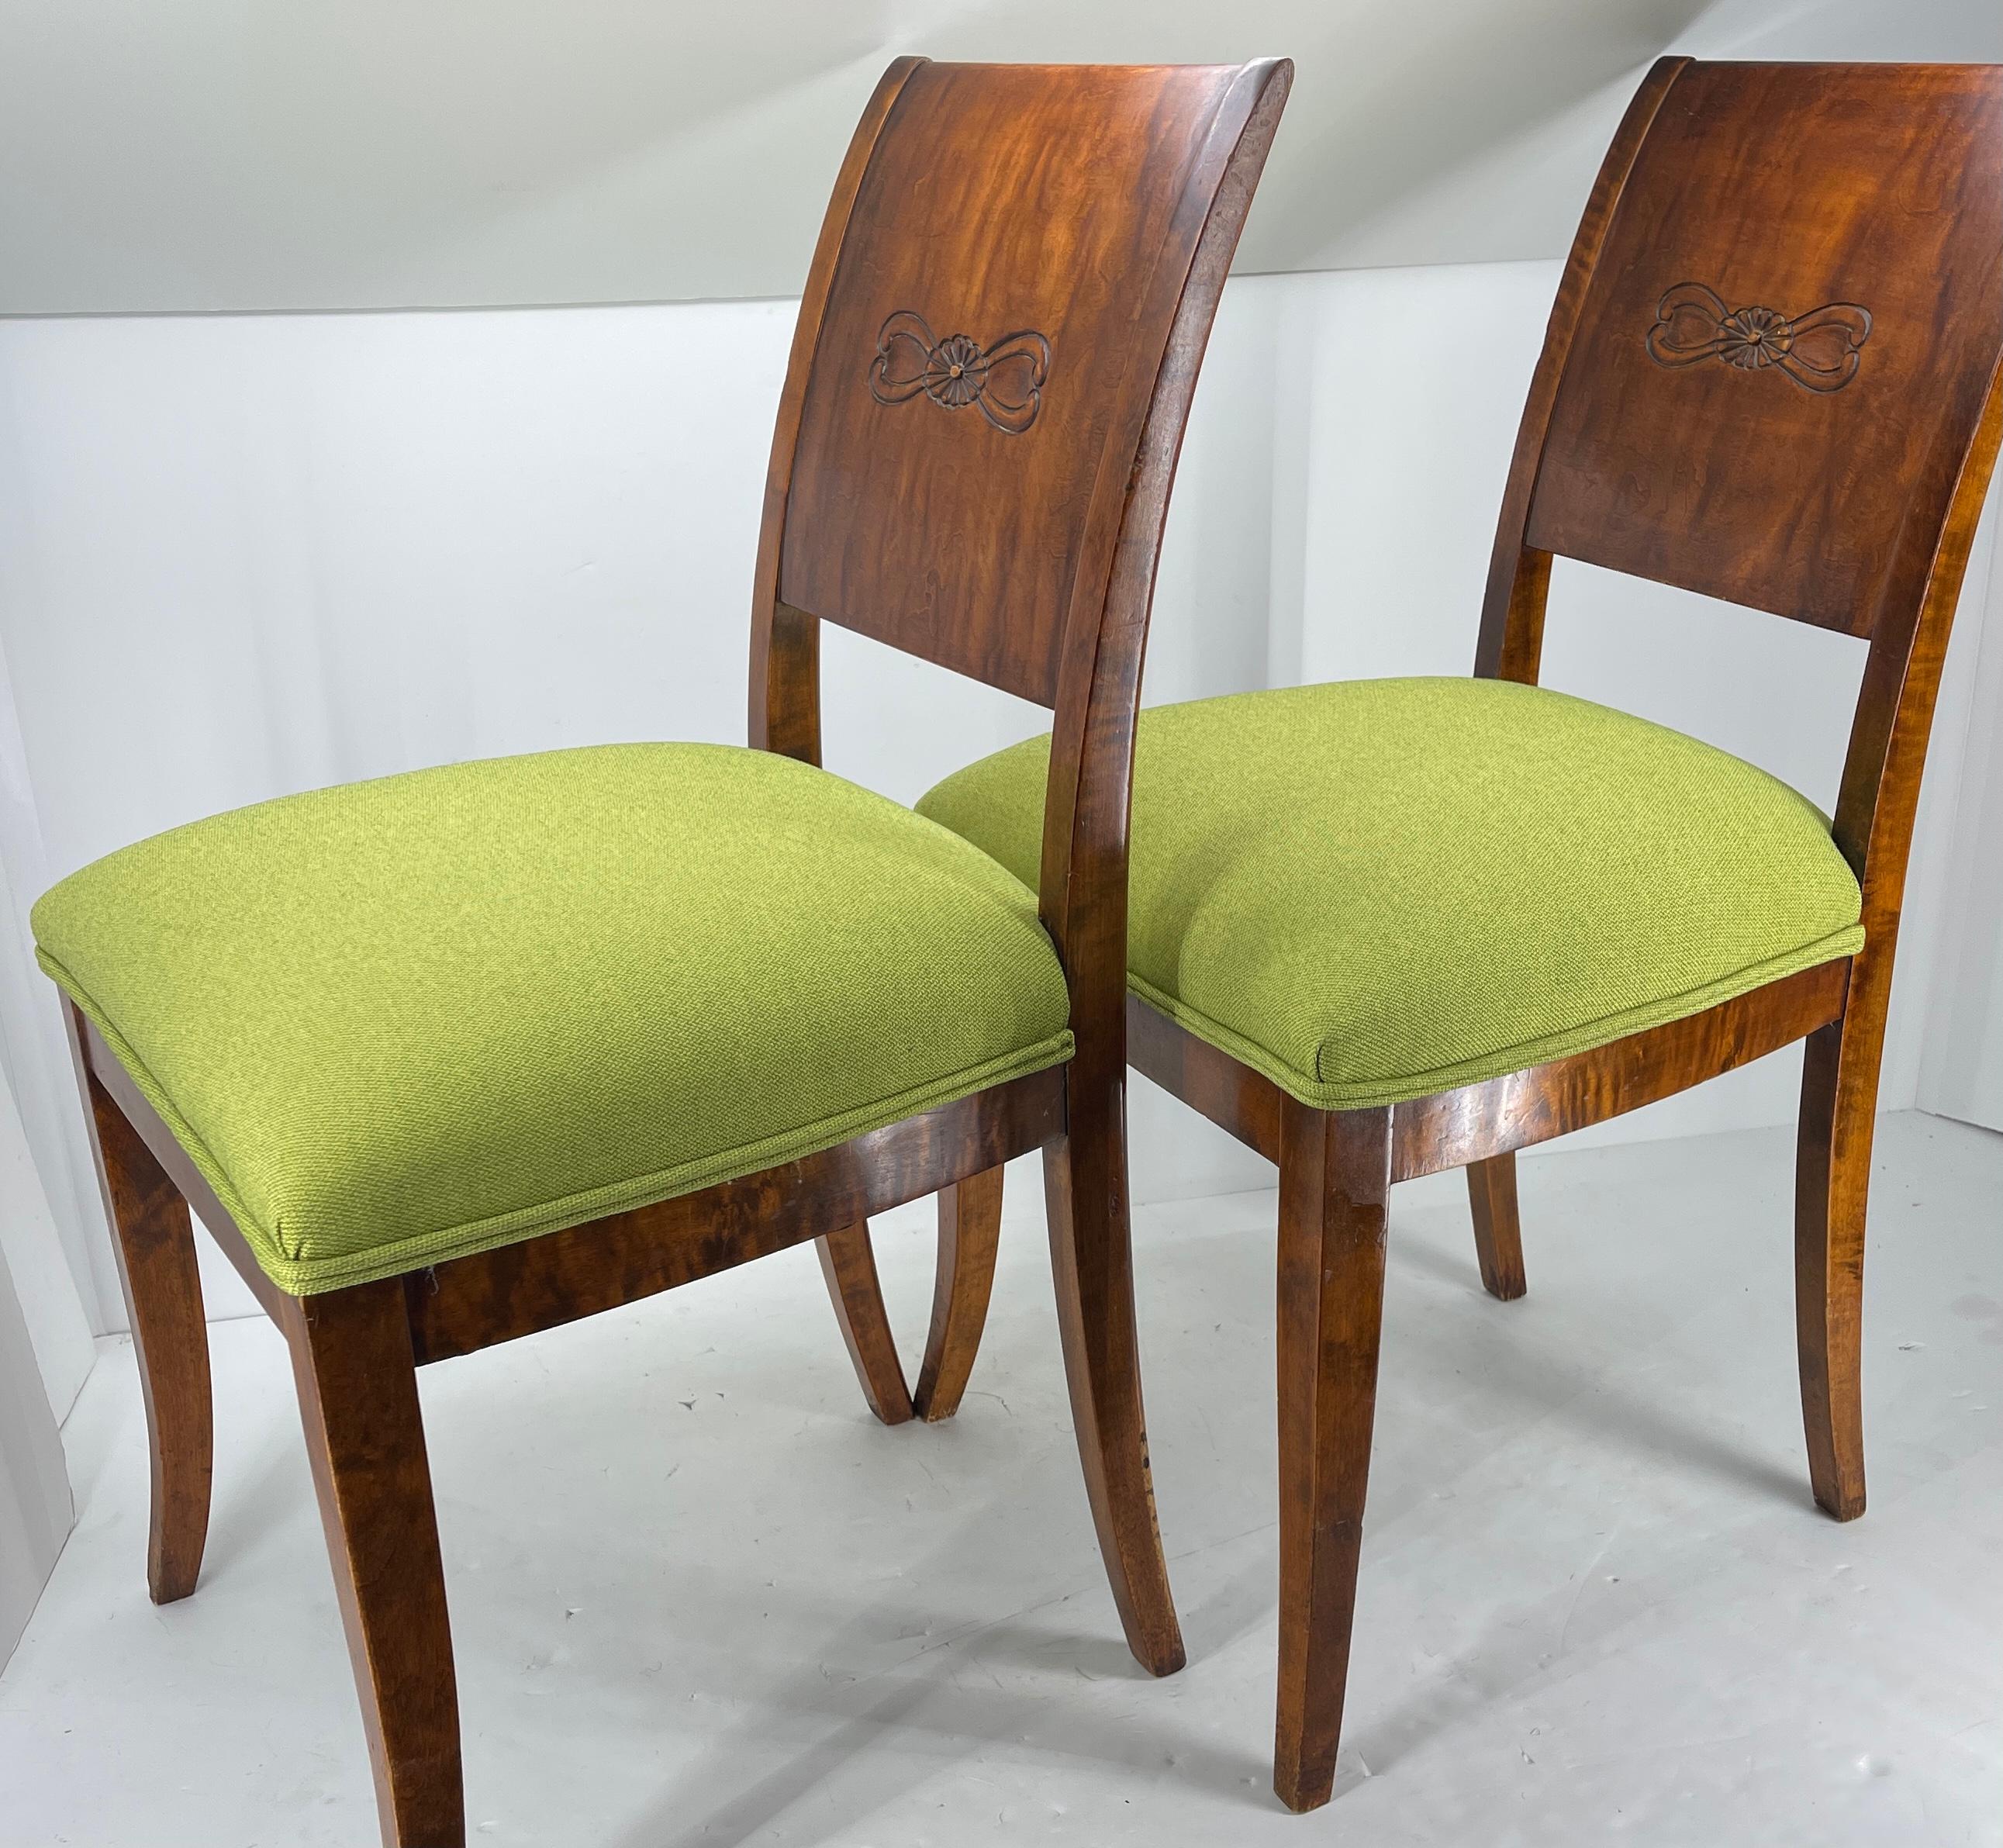 Pair of Danish Biedermeier Grass Green Upholstered Side Chairs In Good Condition For Sale In Haddonfield, NJ